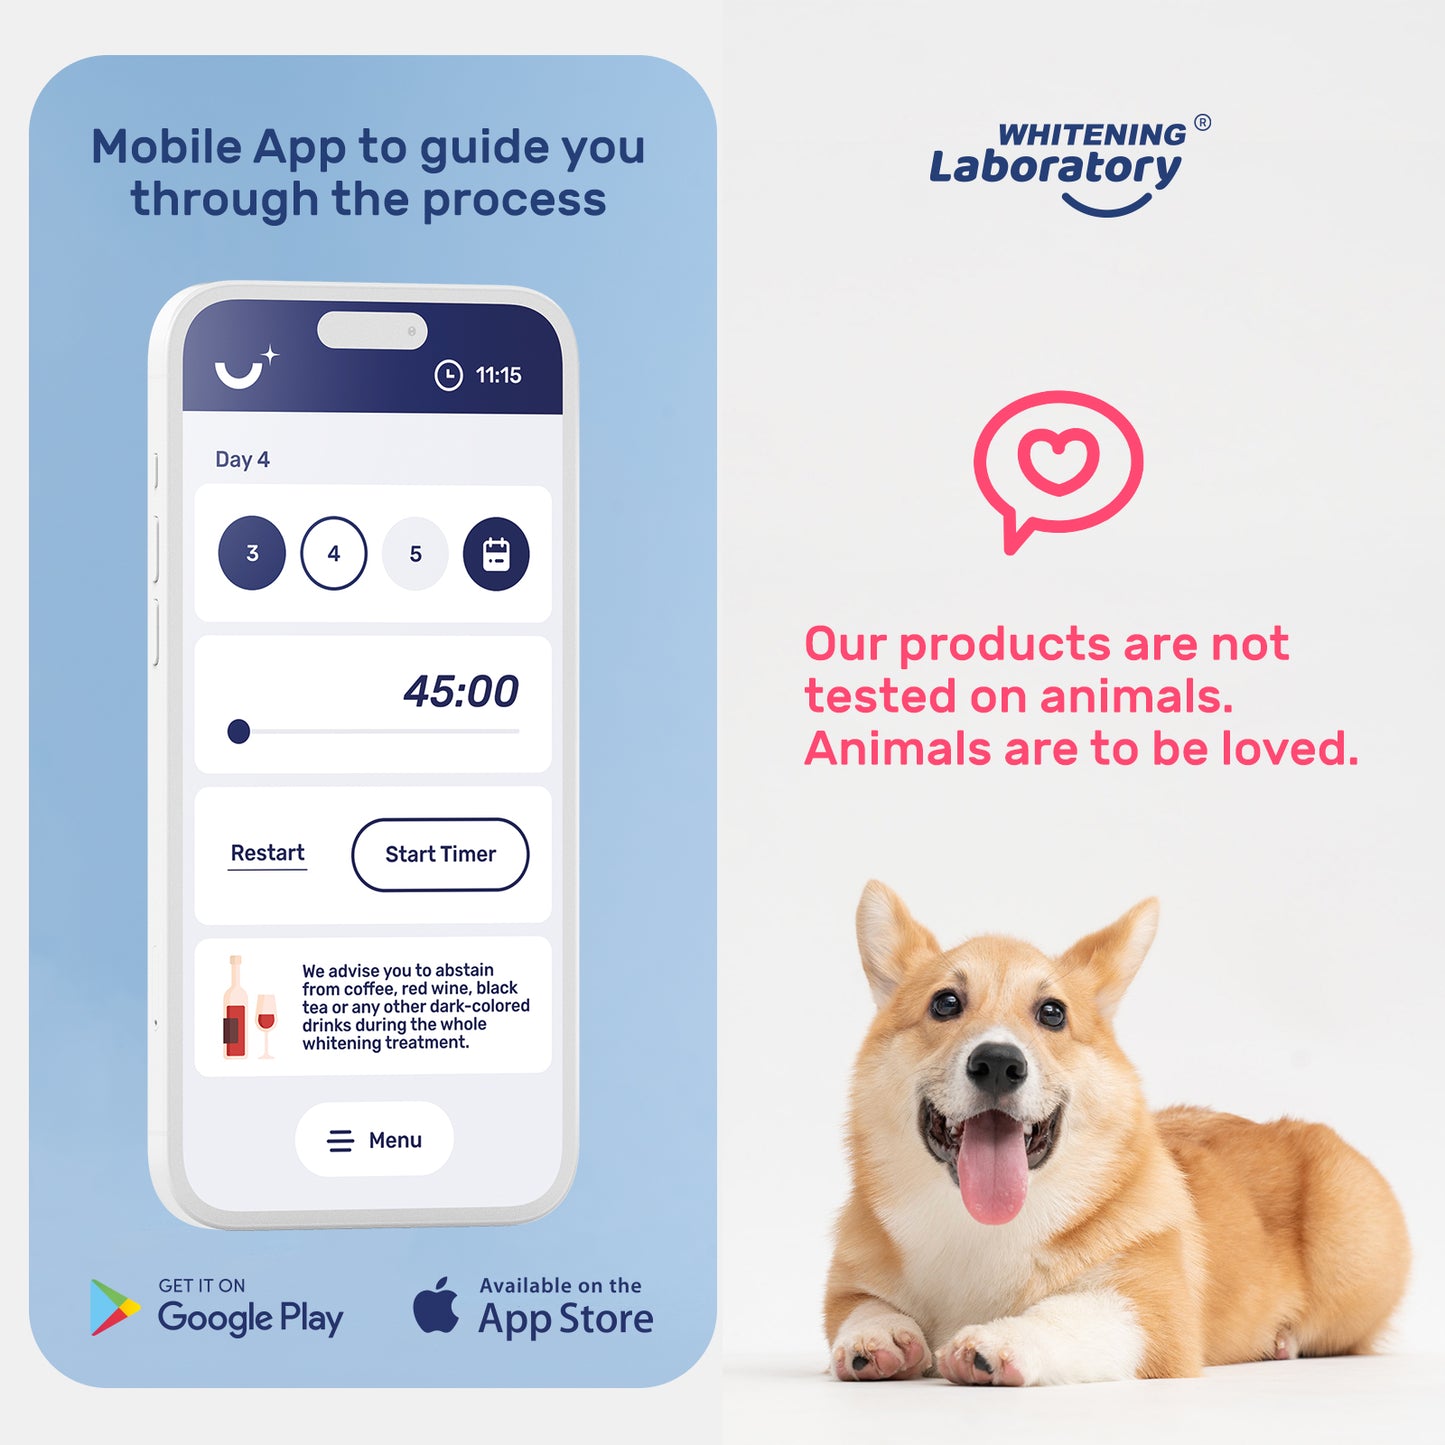 Whitening Laboratory mobile app interface on a smartphone for guiding users through whitening treatment, with a friendly dog emphasizing animal-friendly products.